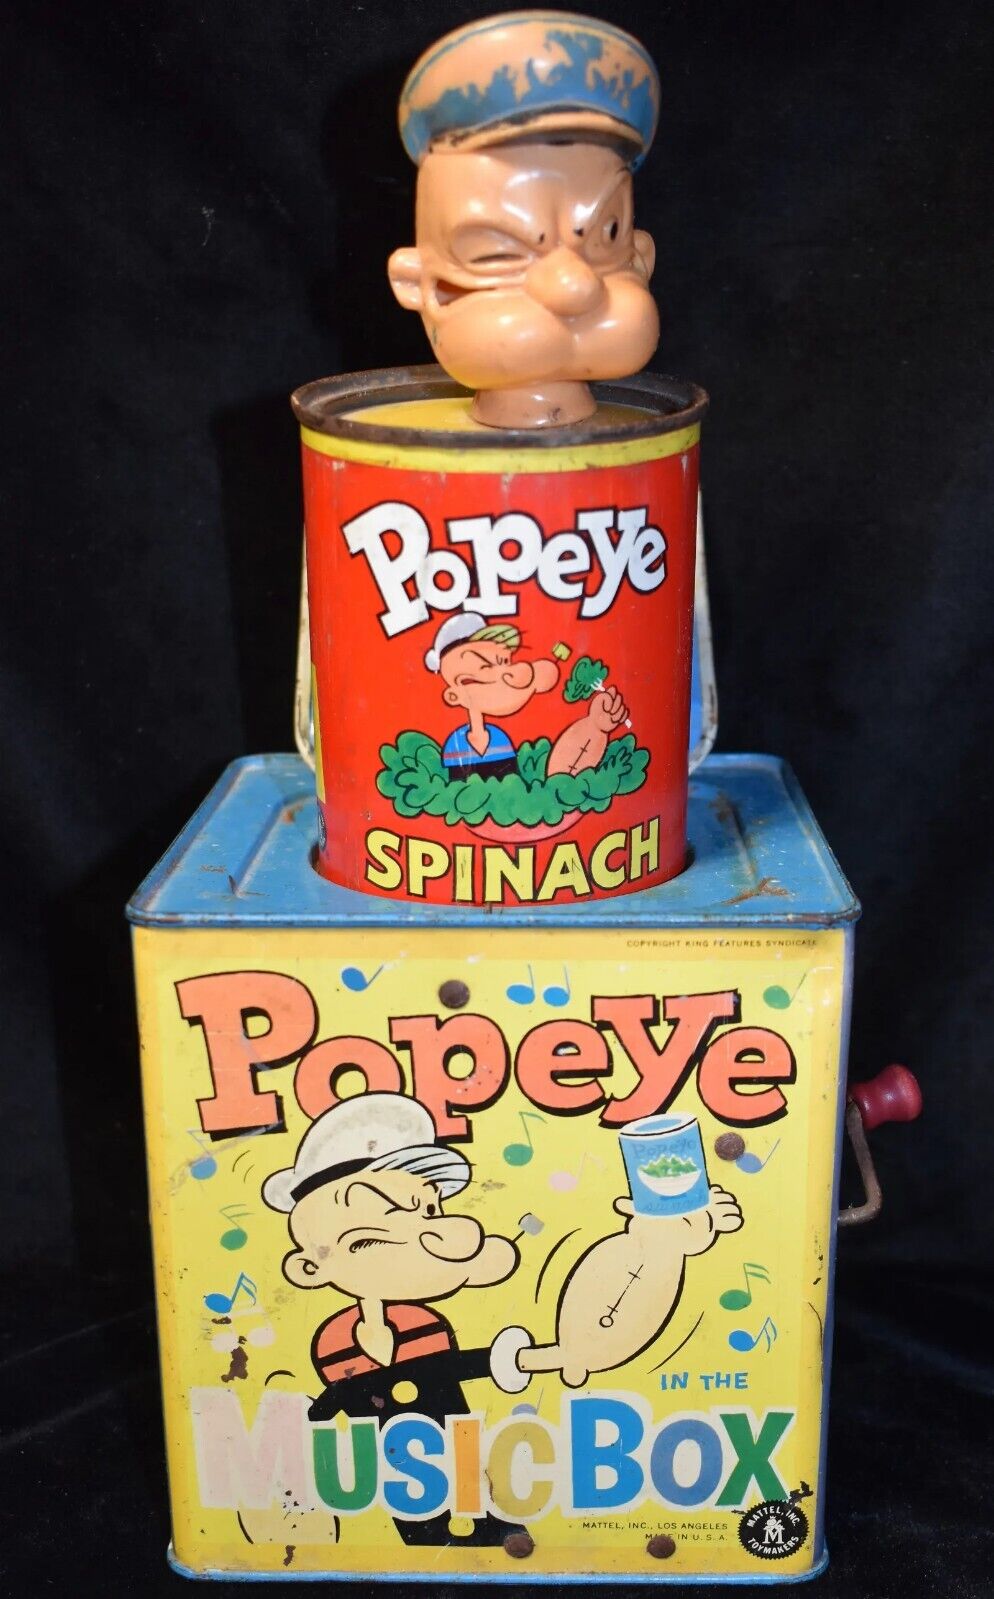 1953 Popeye in the Music Box with working springs super rare